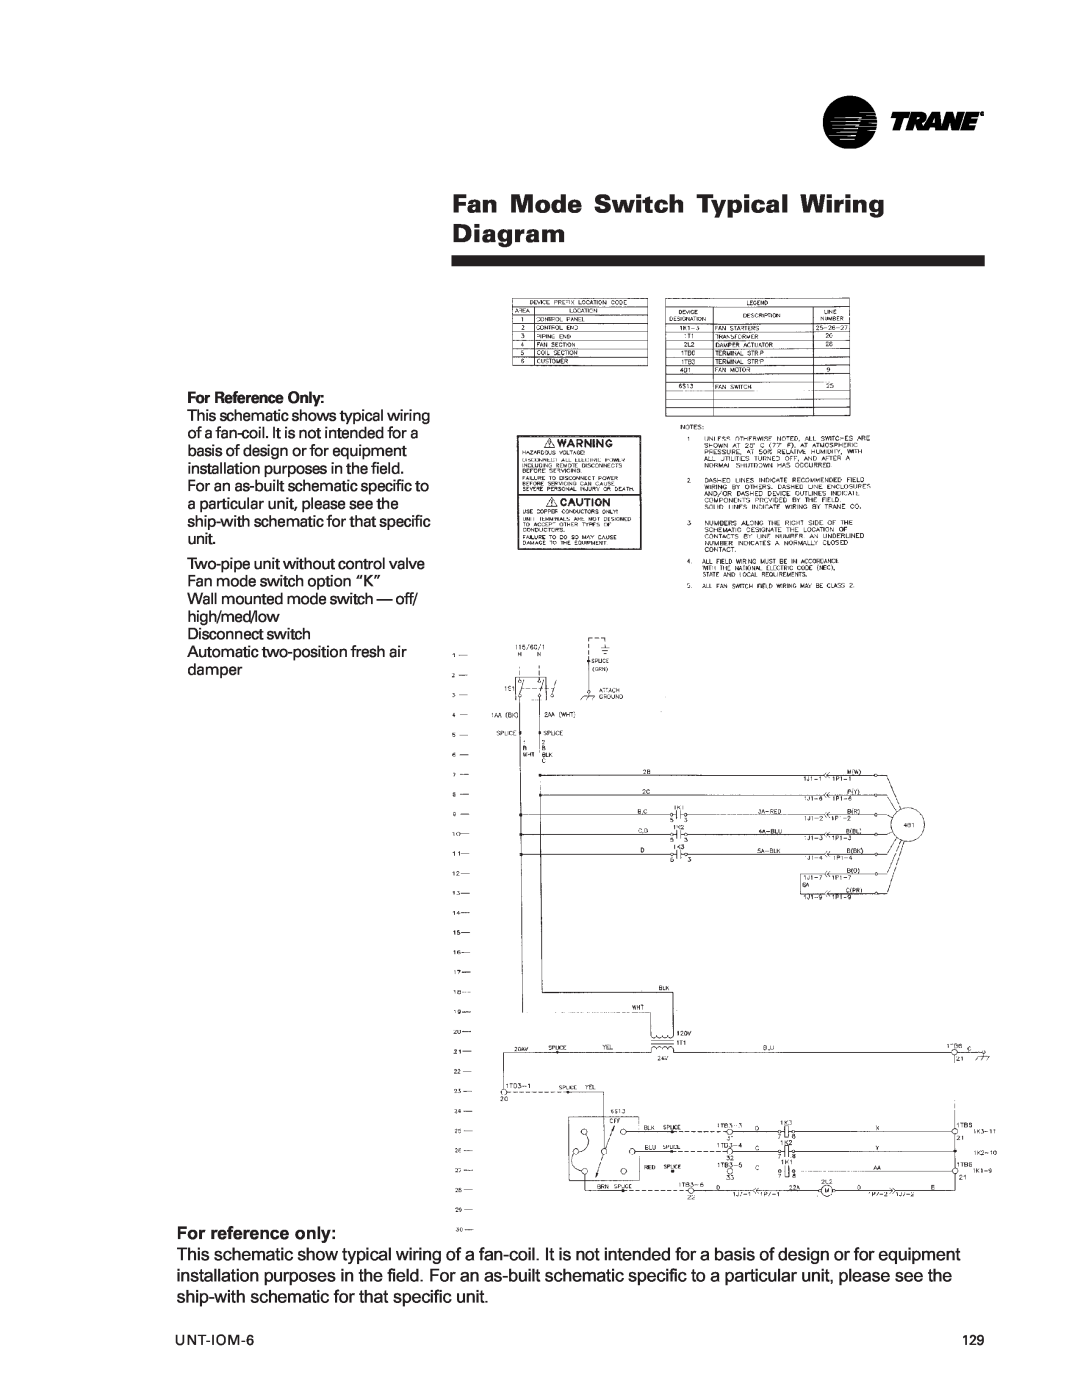 Trane LO manual Fan Mode Switch Typical Wiring Diagram, For reference only 